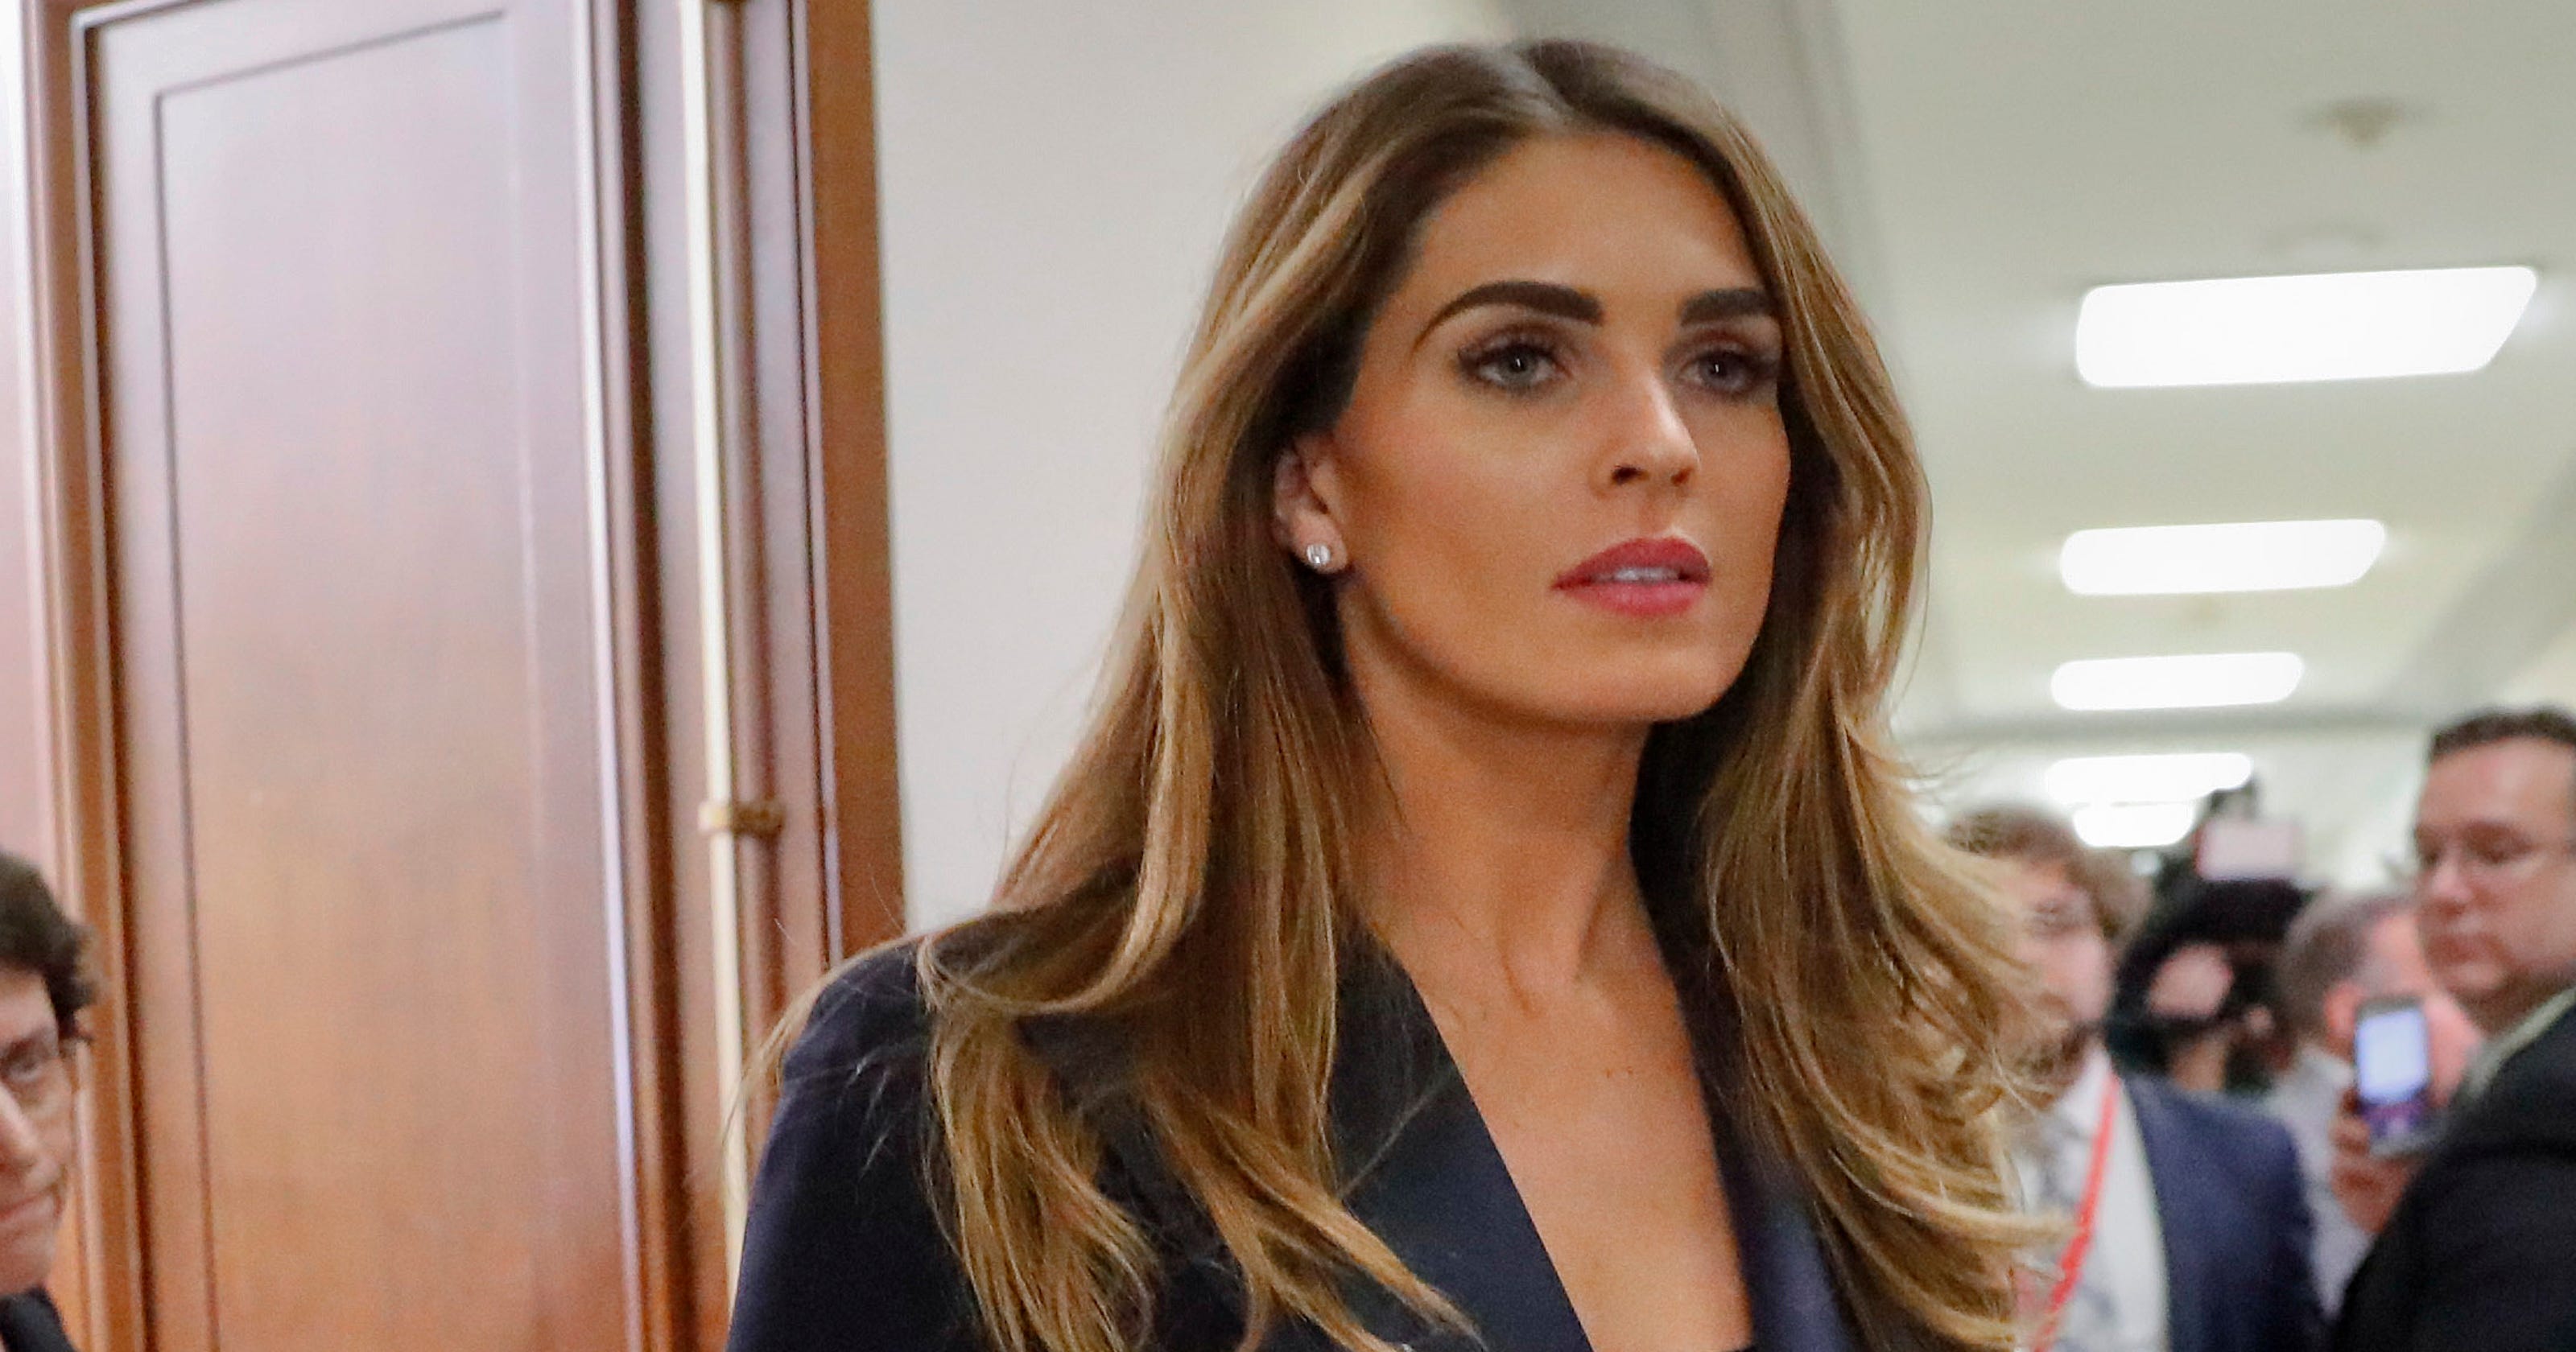 Hope Hicks, former aide to President Trump, stands by House testimony